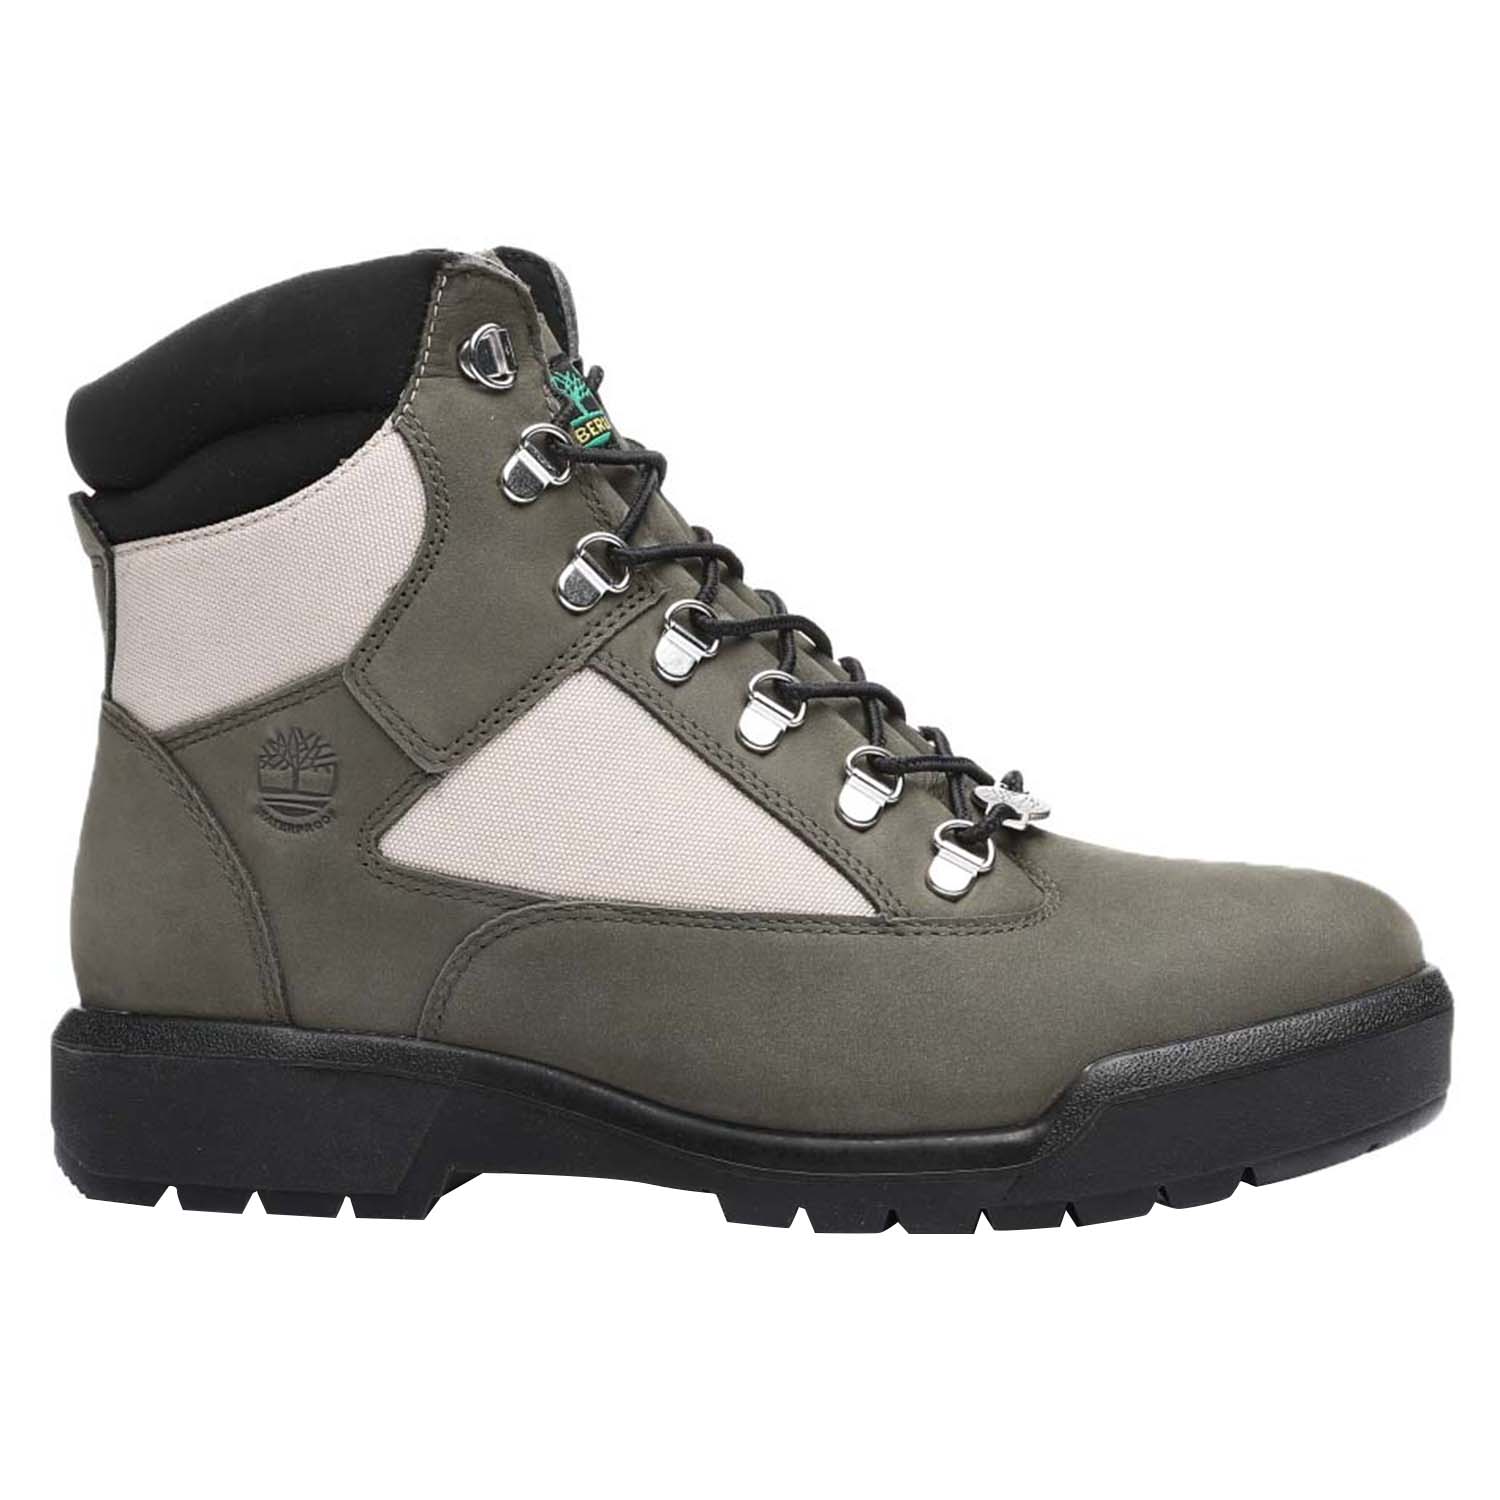 Timberland 6' Field Boot Mens Style : Tb0a2mbm